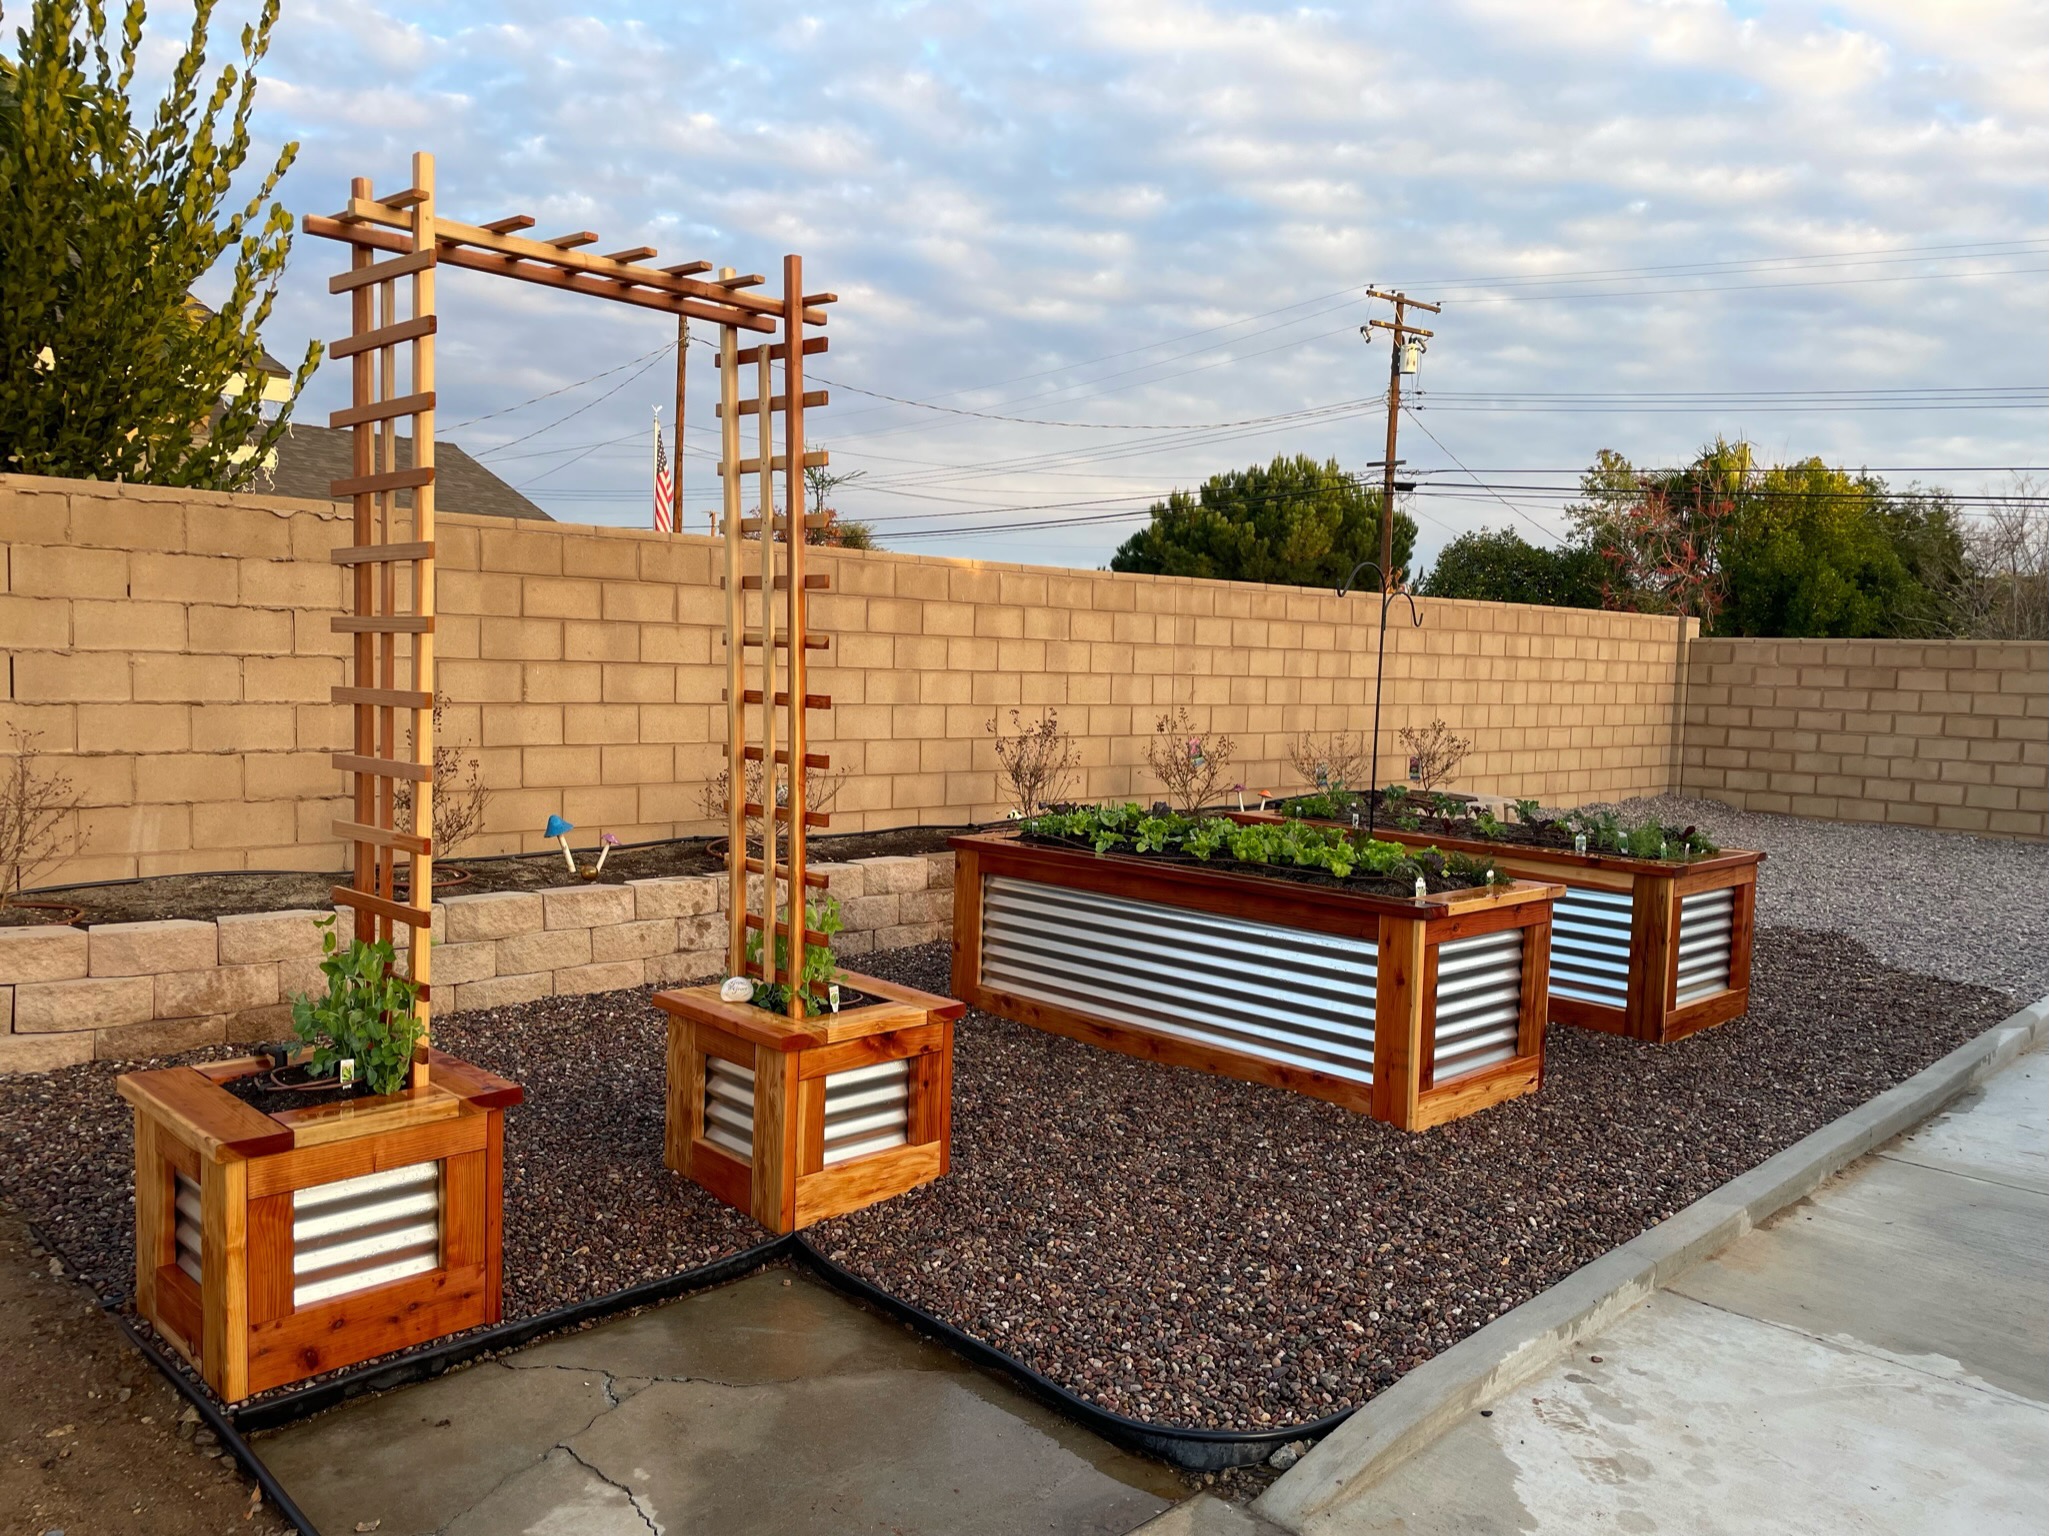 New Raised Bed Garden in Yucaipa California just installed by He Provides